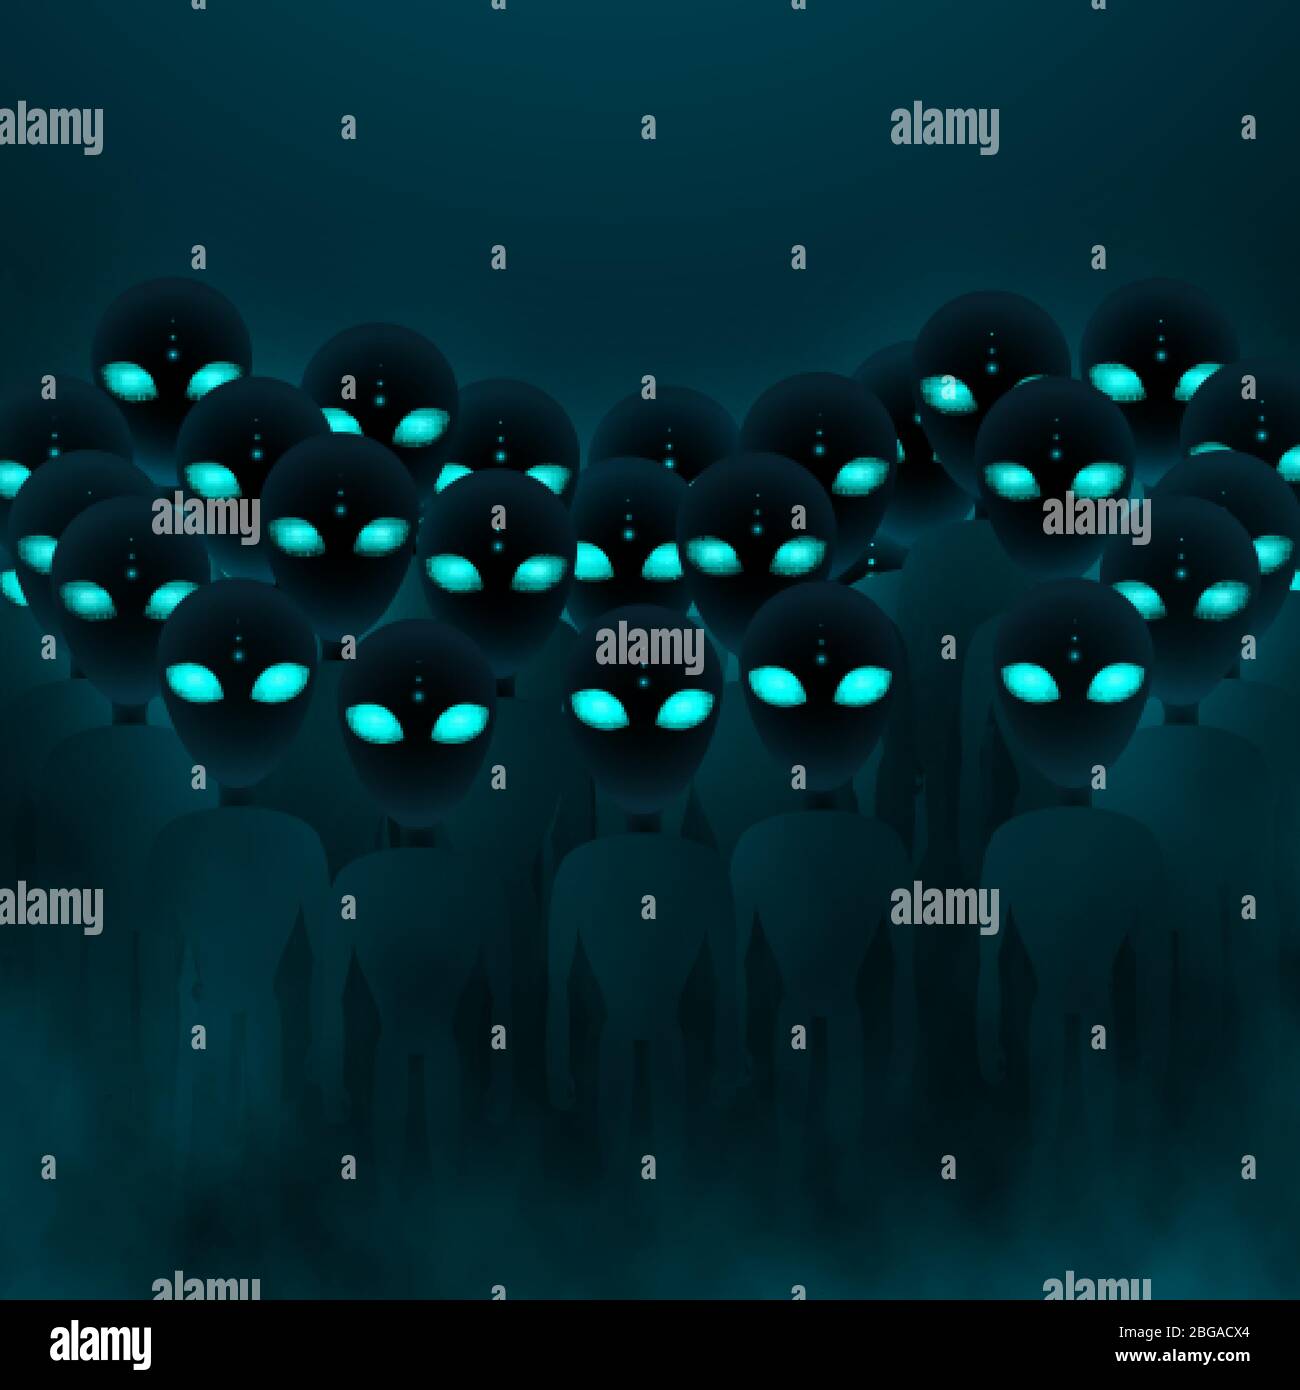 Alien invasion. Group of deamons or aliens with big green eyes. Scary mystery futuristic background. Vector illustration Stock Vector